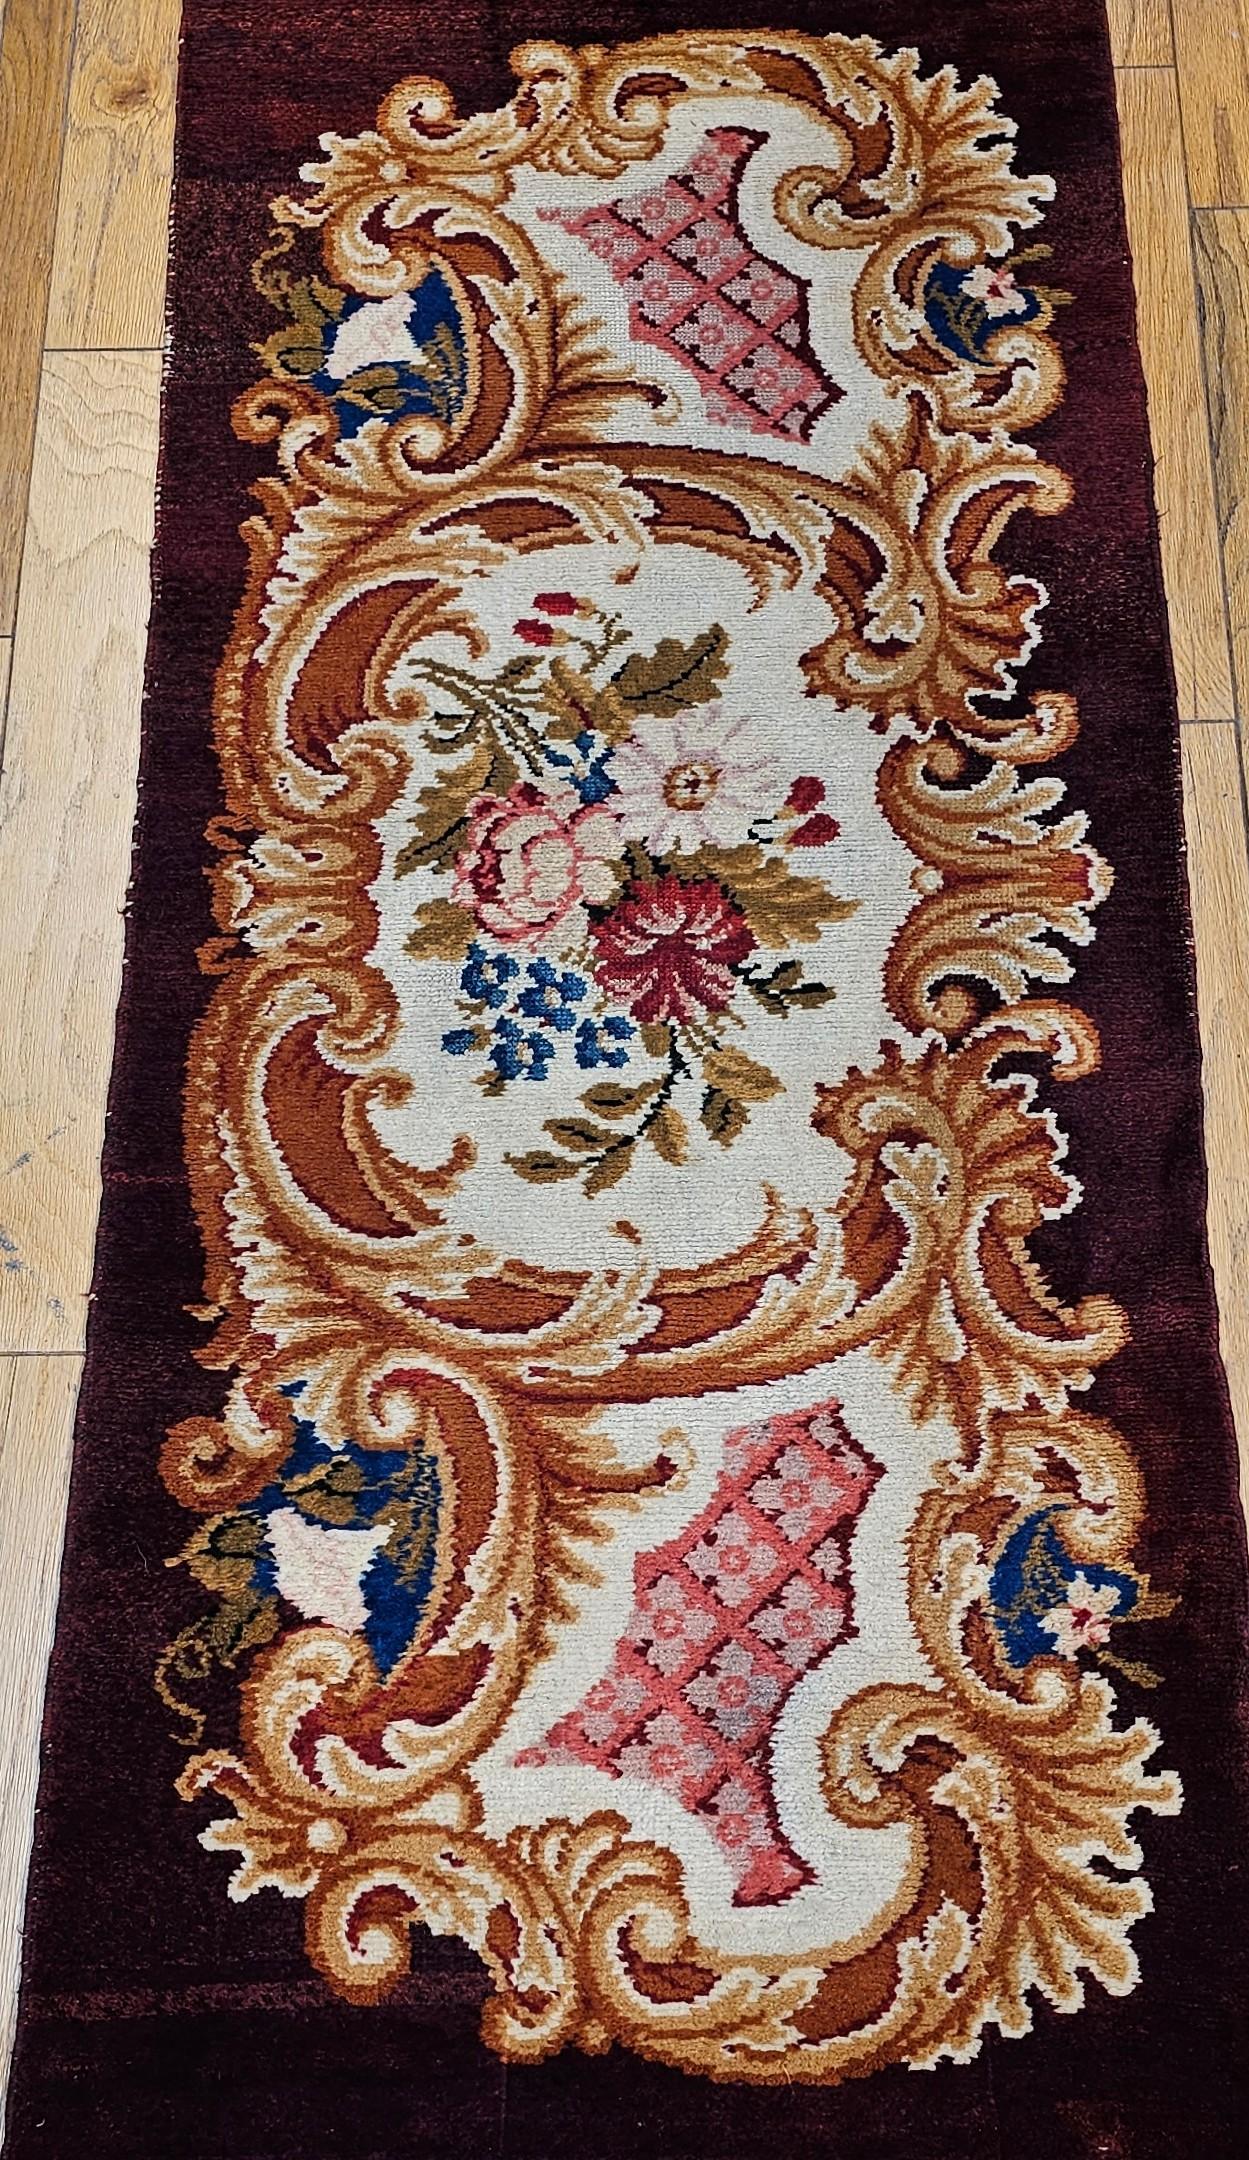 Vintage French Savonnerie hand-knotted area rug circa the early 1900s.  The Savonnerie rug has a classic floral pattern set on a rich chocolate brown background with wonderful design colors in red, pink, blue, and ivory.  This rug (SKU 1737) and the